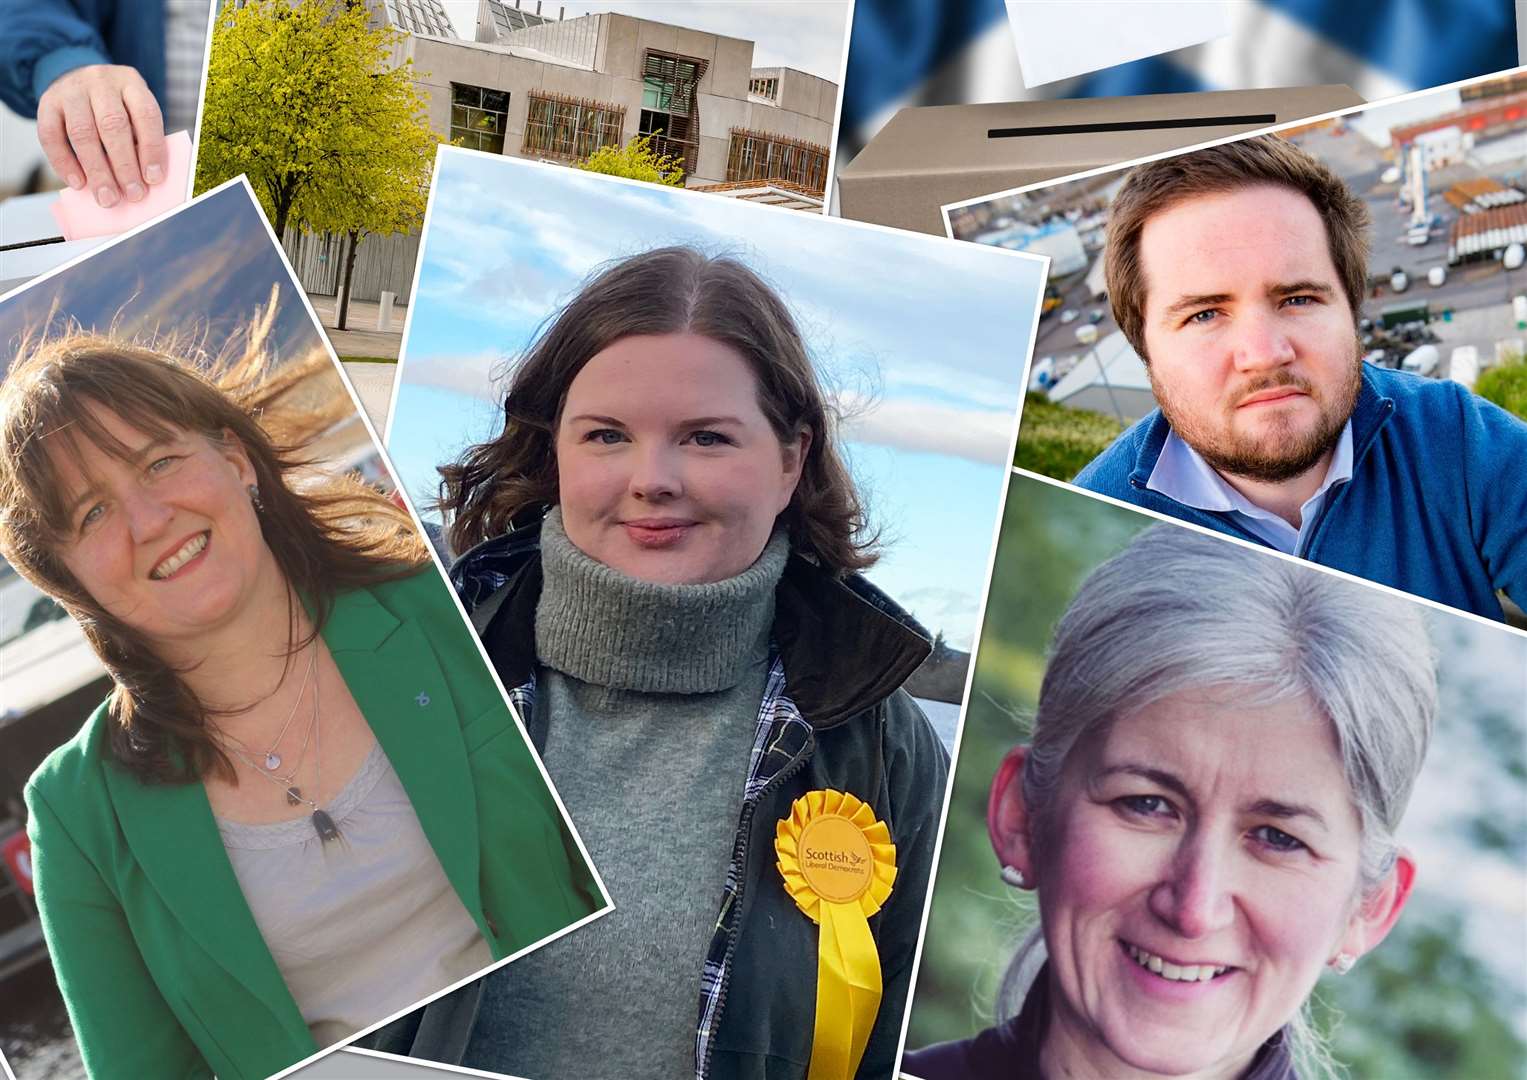 Maree Todd (SNP), Molly Nolan (Liberal Democrats), Struan Mackie (Scottish Conservative and Unionist) and Marion Donaldson (Labour) took part in the virtual hustings hosted by Caithness Chamber of Commerce.